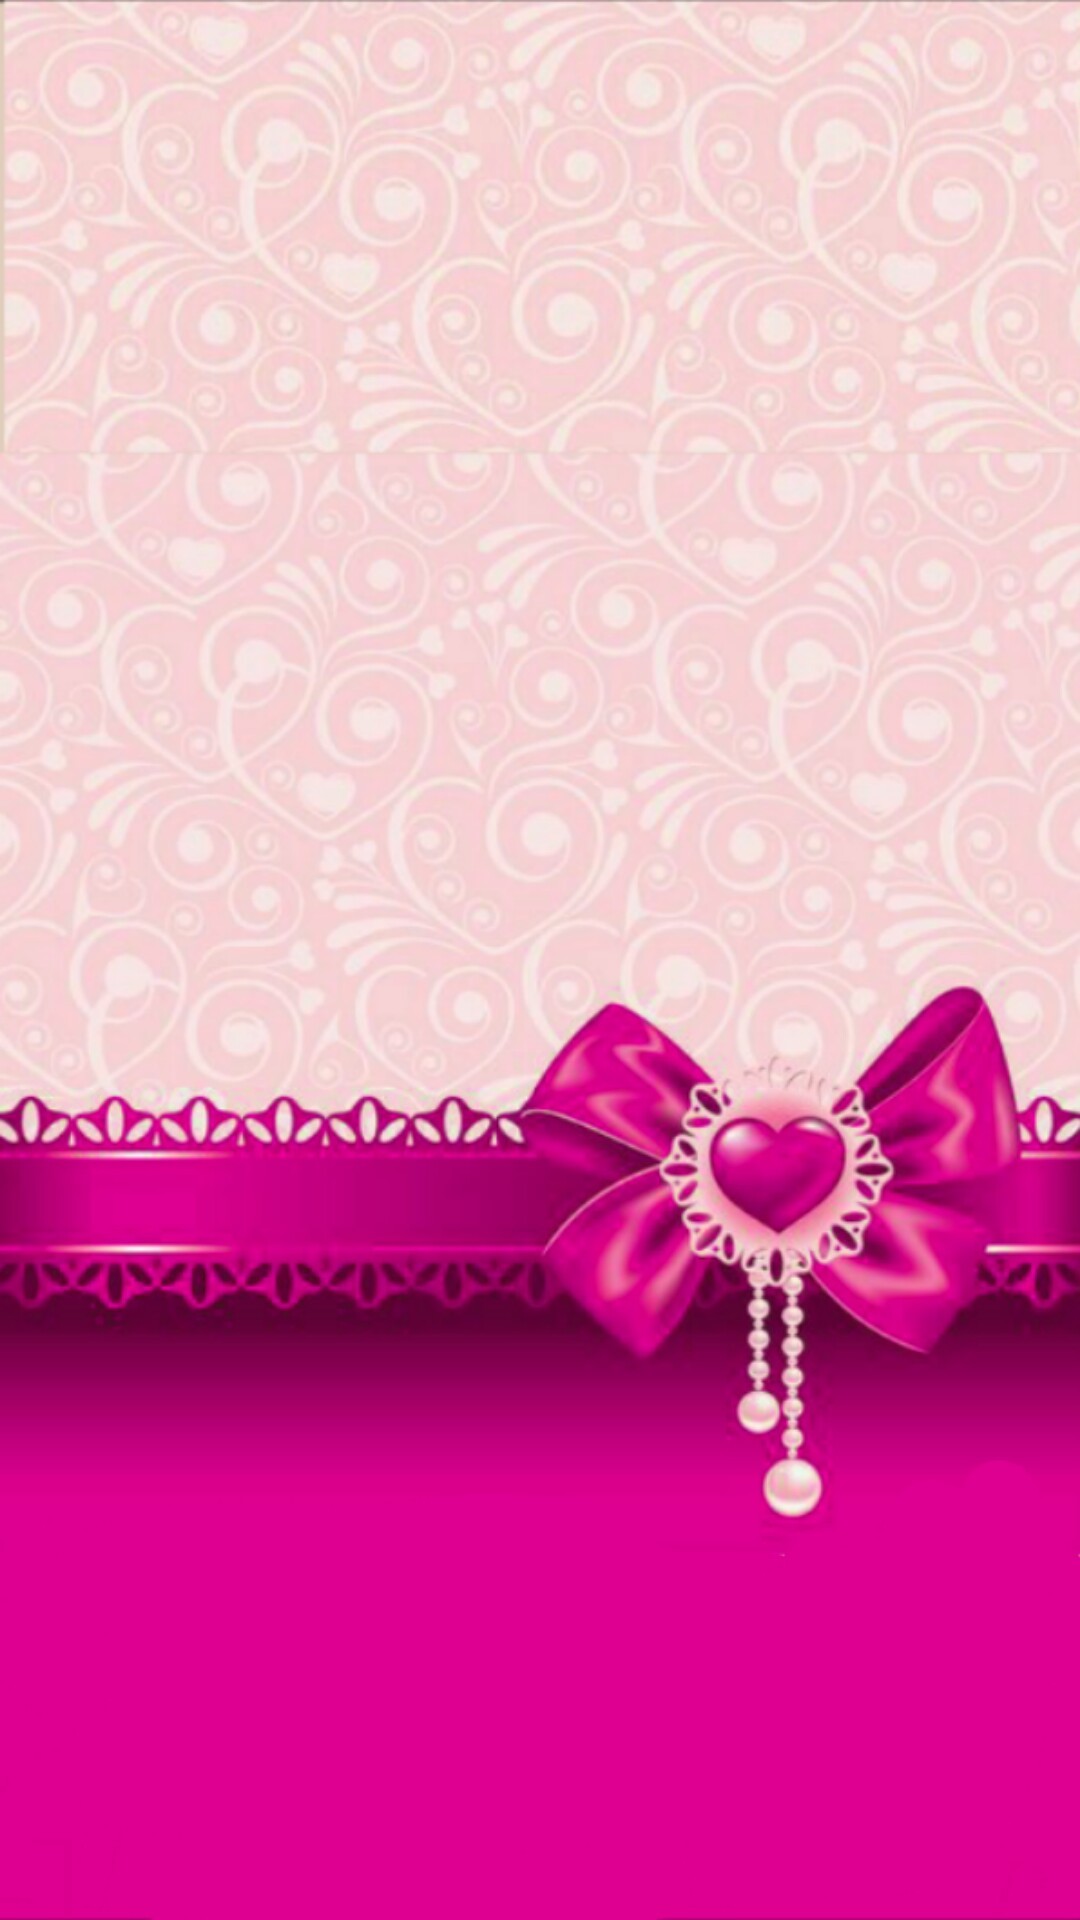 Ribbon Background Images HD Pictures and Wallpaper For Free Download   Pngtree